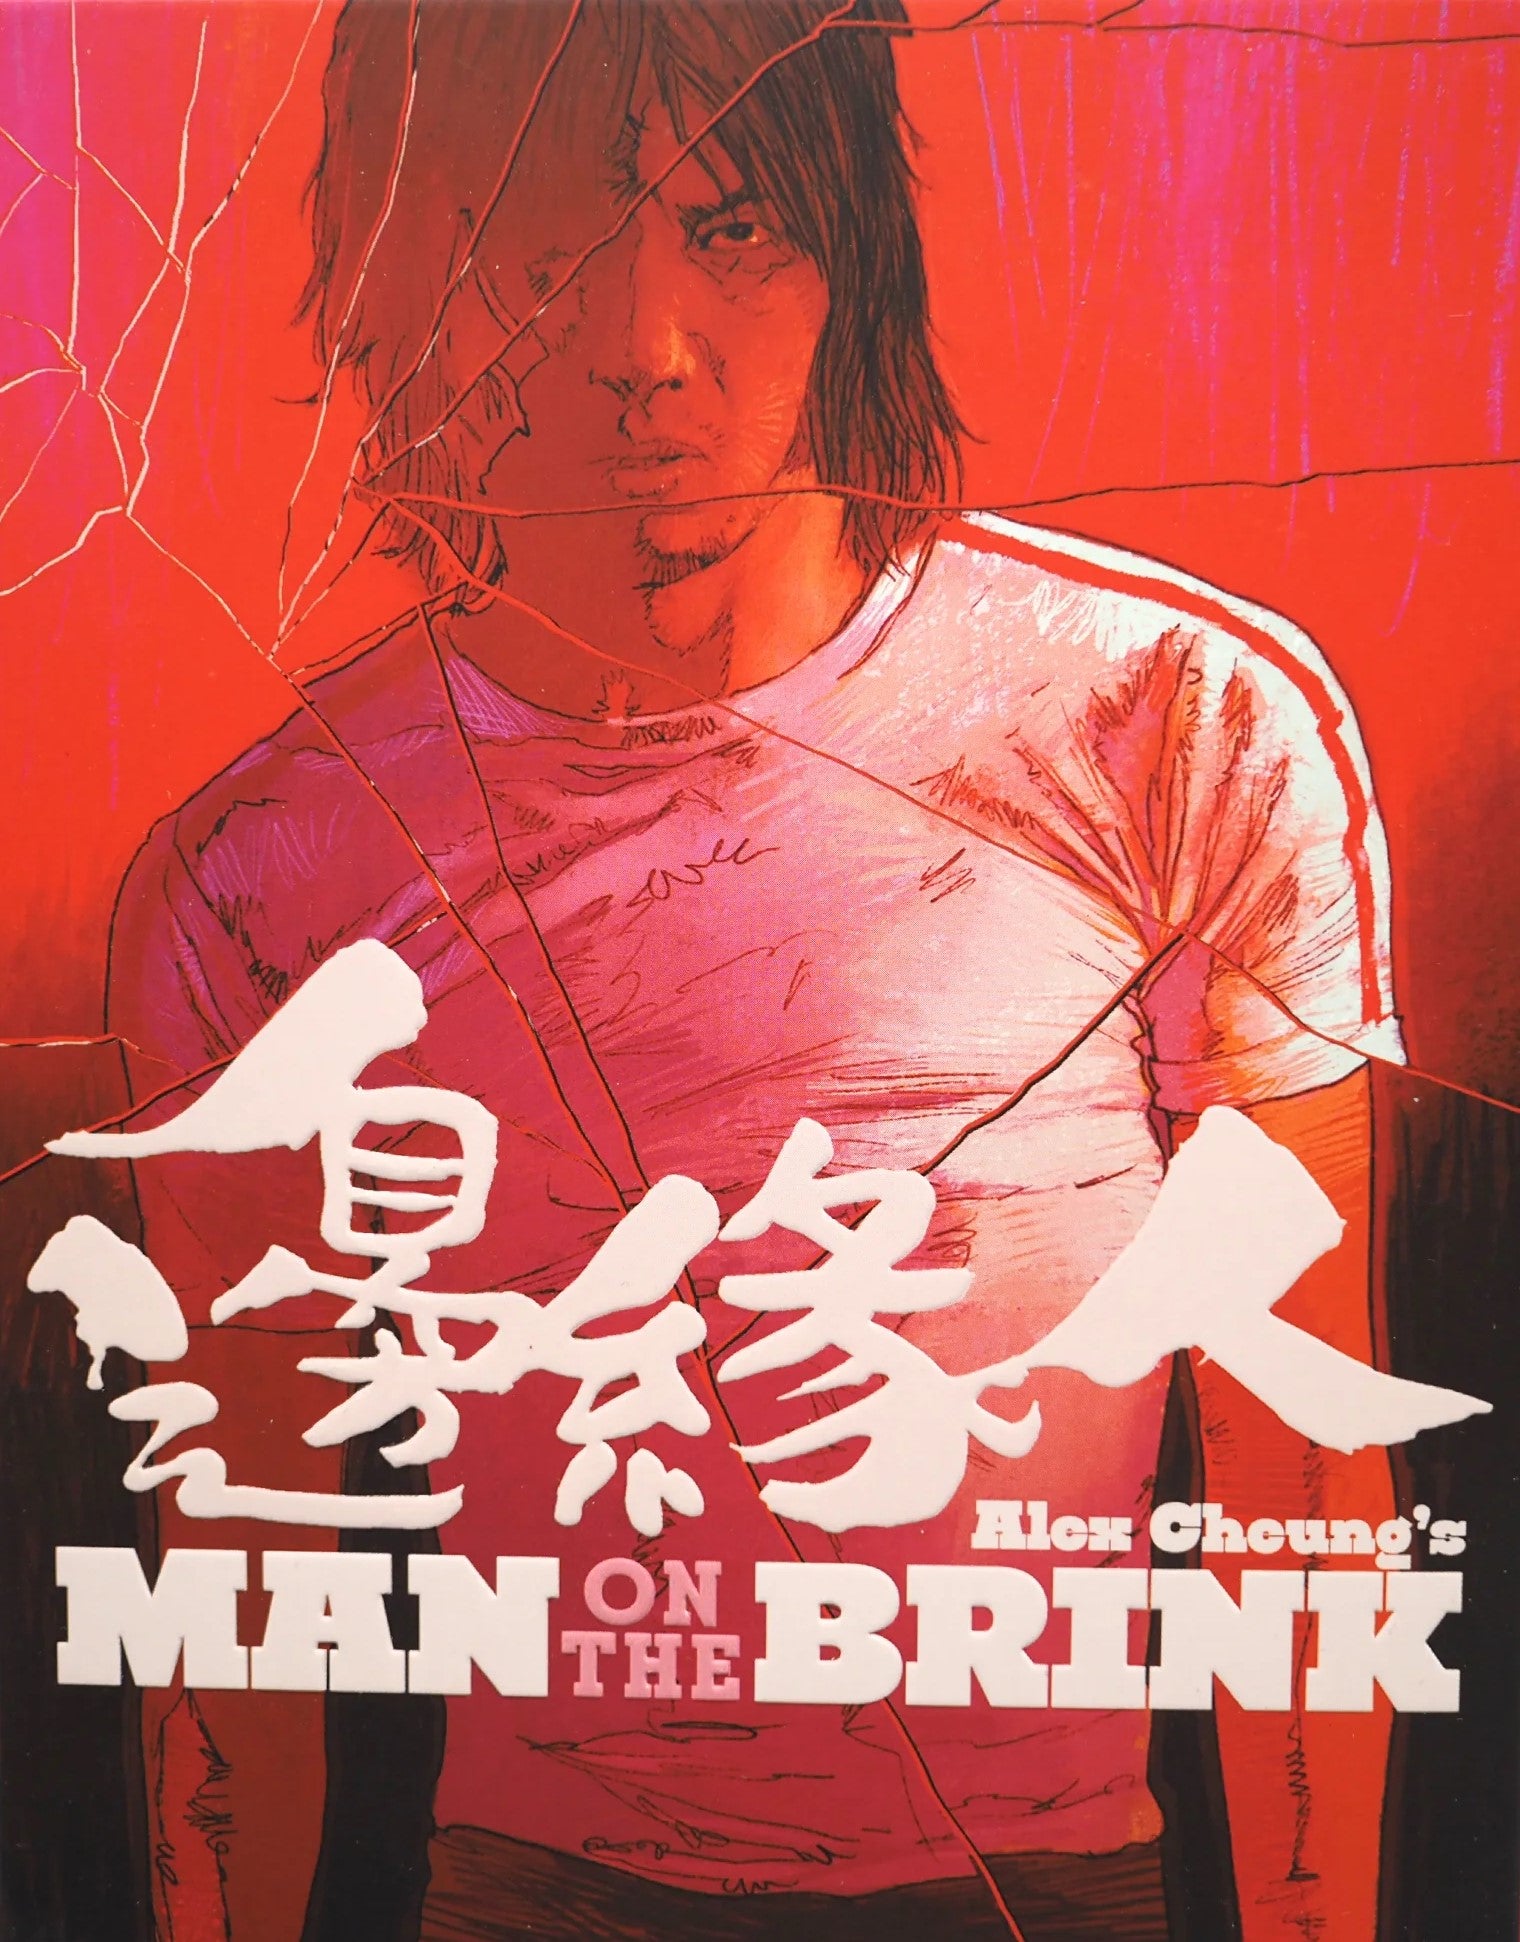 MAN ON THE BRINK (LIMITED EDITION) BLU-RAY